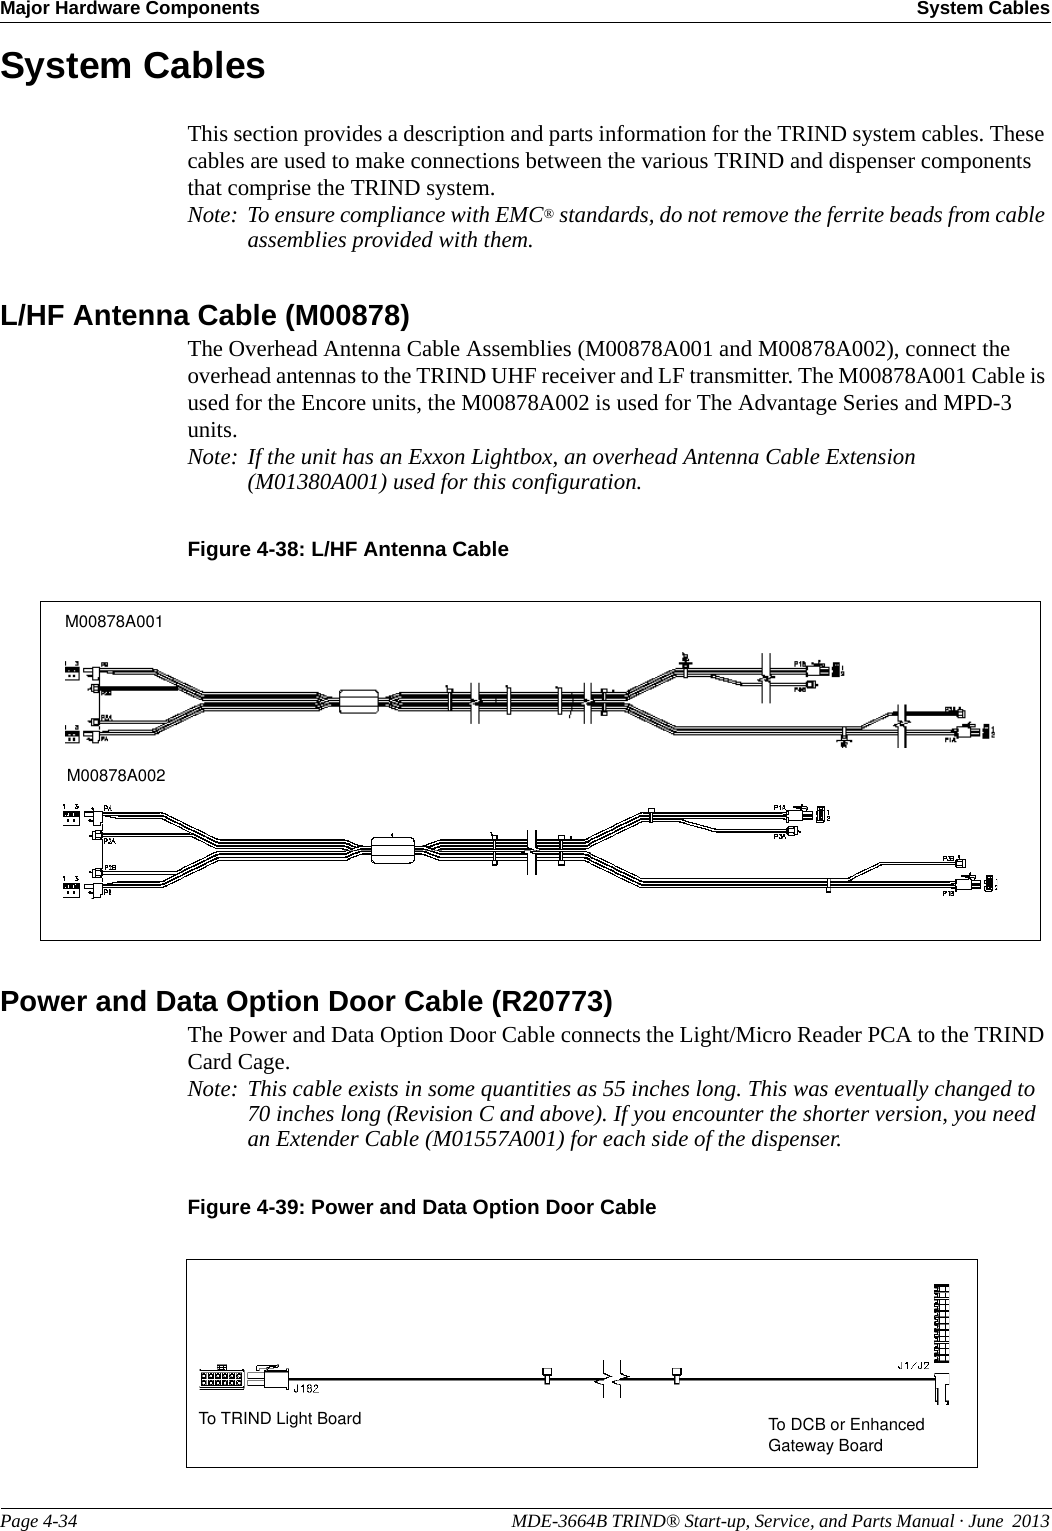 Major Hardware Components System CablesPage 4-34                                                                                                  MDE-3664B TRIND® Start-up, Service, and Parts Manual · June  2013System CablesThis section provides a description and parts information for the TRIND system cables. These cables are used to make connections between the various TRIND and dispenser components that comprise the TRIND system.Note: To ensure compliance with EMC® standards, do not remove the ferrite beads from cable assemblies provided with them.L/HF Antenna Cable (M00878)The Overhead Antenna Cable Assemblies (M00878A001 and M00878A002), connect the overhead antennas to the TRIND UHF receiver and LF transmitter. The M00878A001 Cable is used for the Encore units, the M00878A002 is used for The Advantage Series and MPD-3 units.Note: If the unit has an Exxon Lightbox, an overhead Antenna Cable Extension (M01380A001) used for this configuration.Figure 4-38: L/HF Antenna CableM00878A001M00878A002Power and Data Option Door Cable (R20773)The Power and Data Option Door Cable connects the Light/Micro Reader PCA to the TRIND Card Cage. Note: This cable exists in some quantities as 55 inches long. This was eventually changed to 70 inches long (Revision C and above). If you encounter the shorter version, you need an Extender Cable (M01557A001) for each side of the dispenser. Figure 4-39: Power and Data Option Door CableTo DCB or Enhanced Gateway BoardTo TRIND Light Board